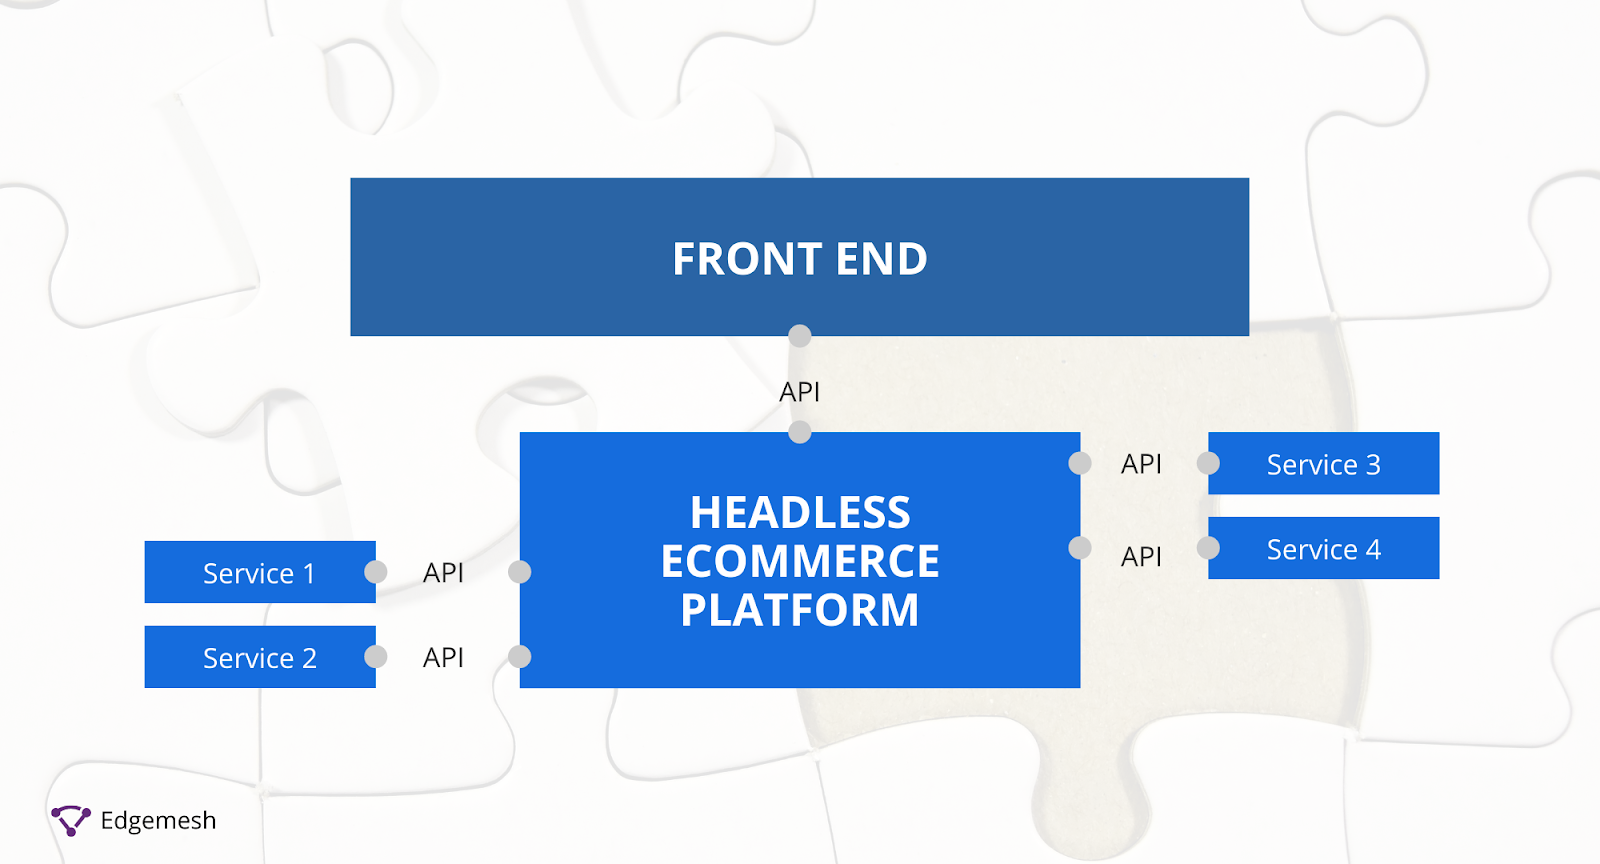 What is headless ecommerce? This is the decoupling of the frontend from the backend of an ecommerce website. 